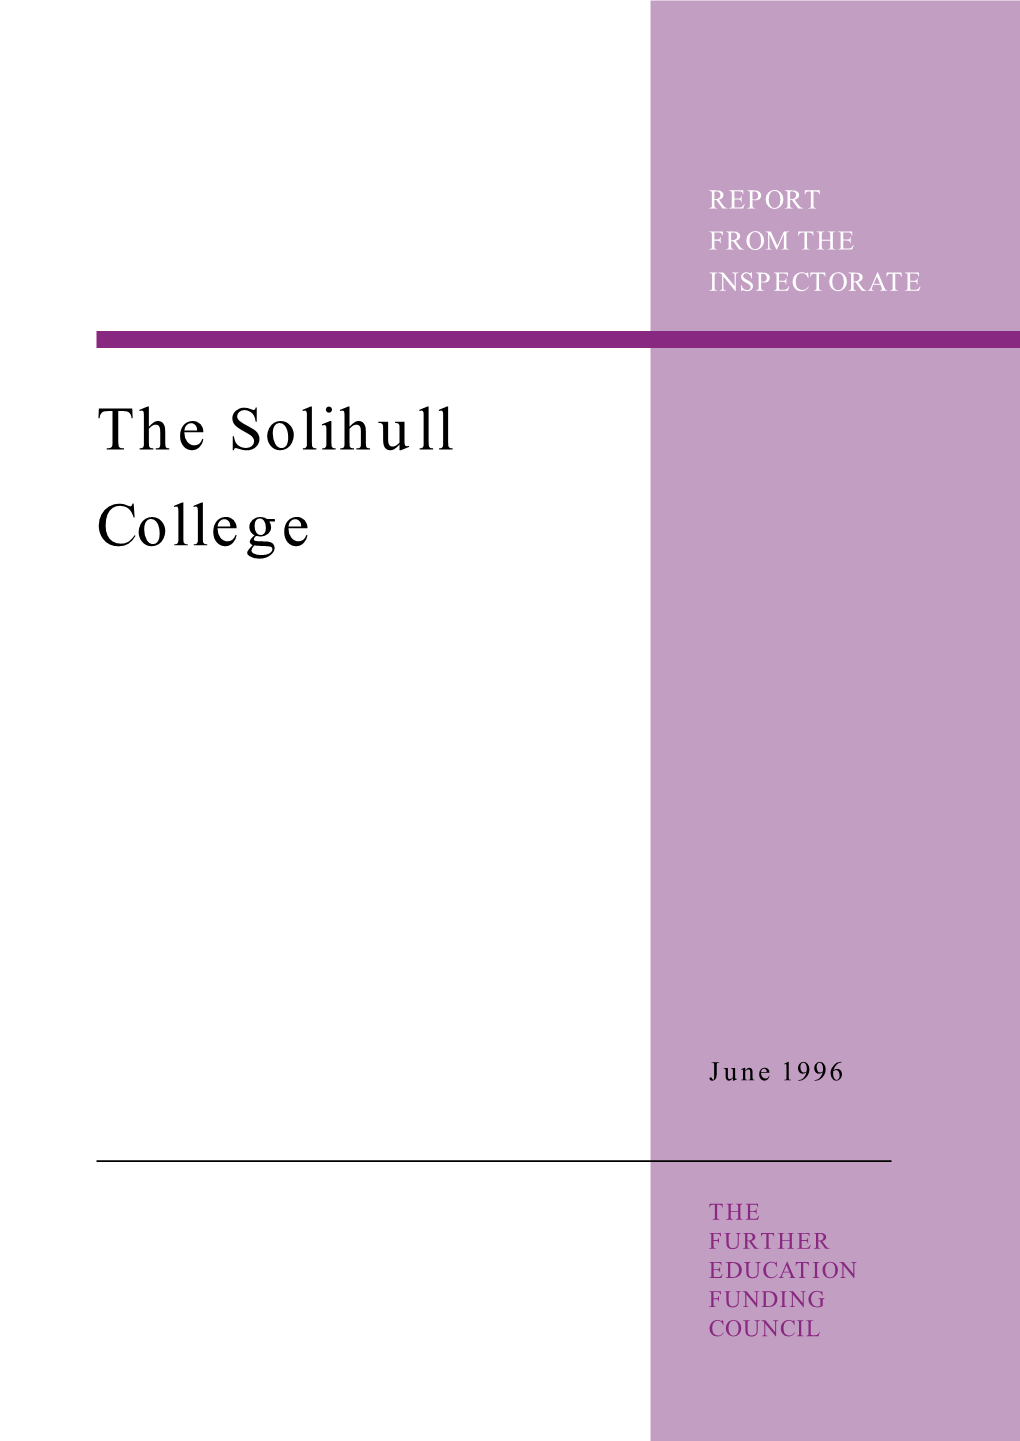 The Solihull College